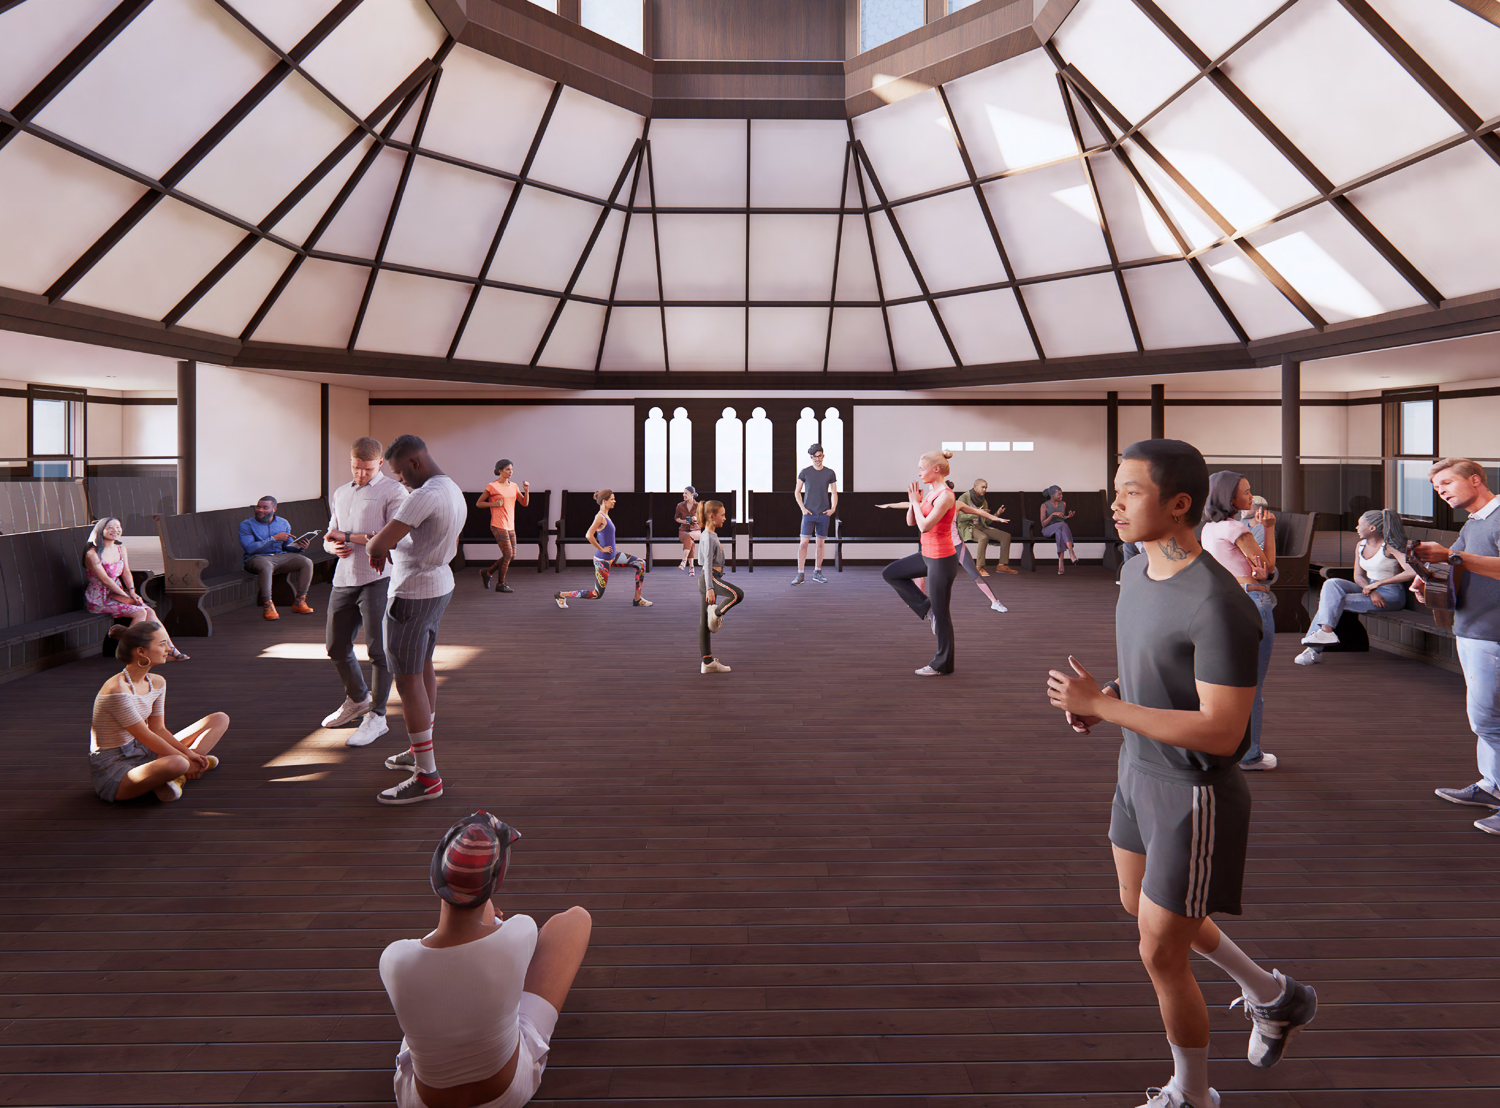 Brooklyn Arms affordable housing fitness space, rendering by AS Architecture